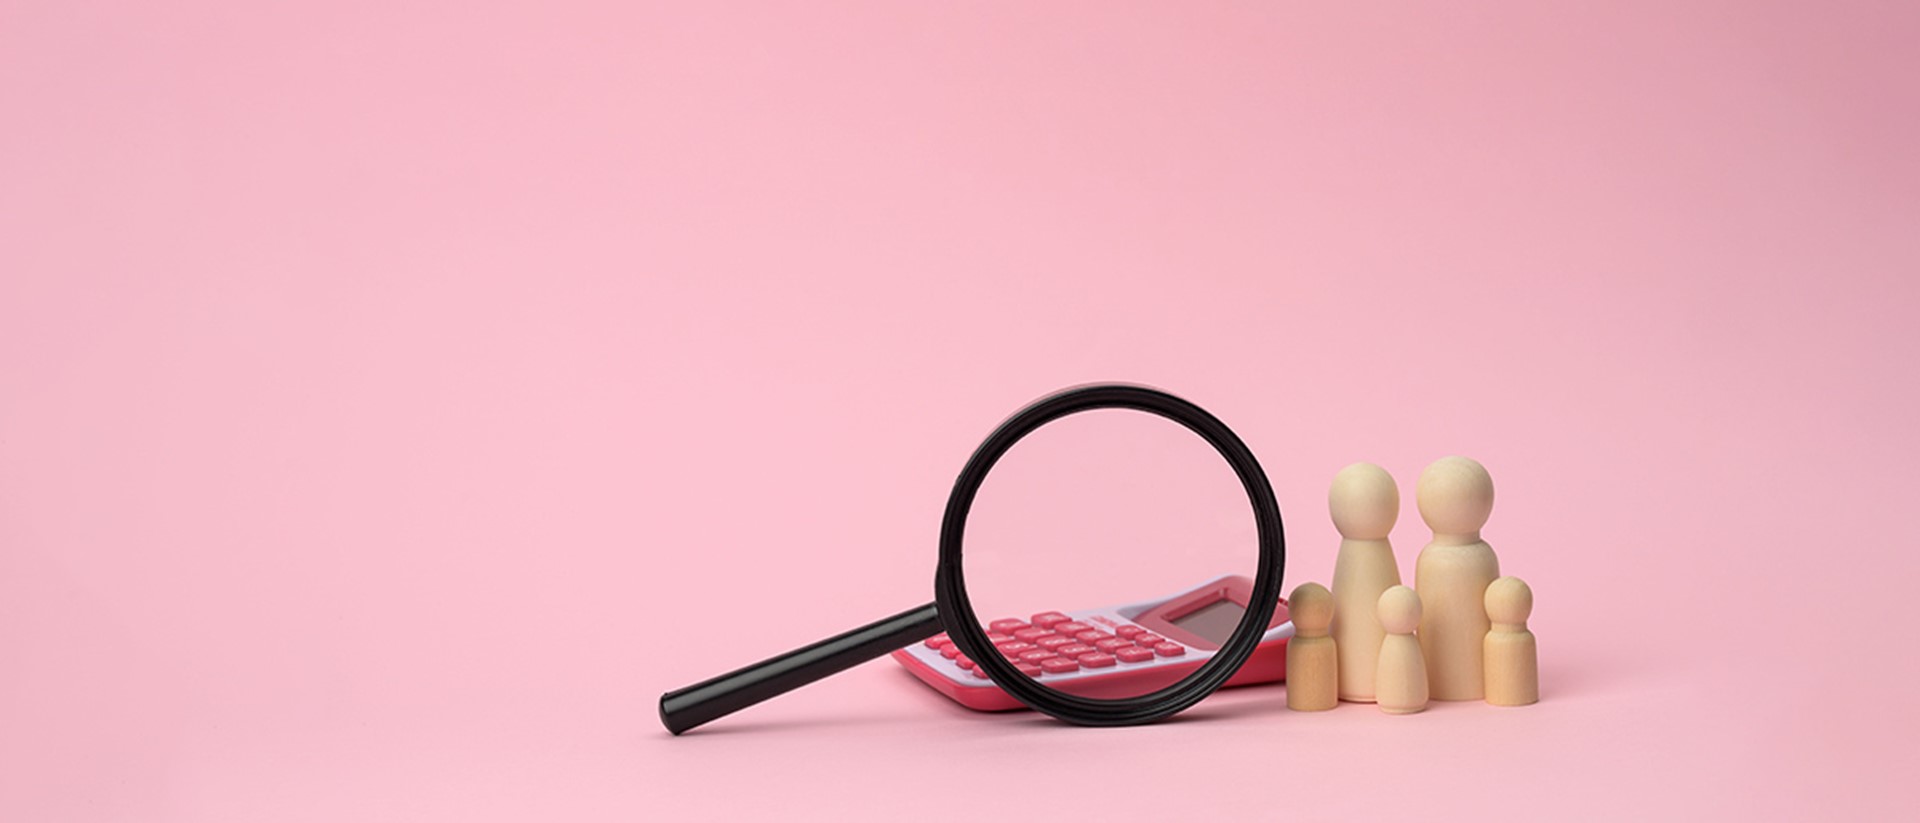 Image of a magnifying glass, a calculator and wooden figures of a family on a pink background